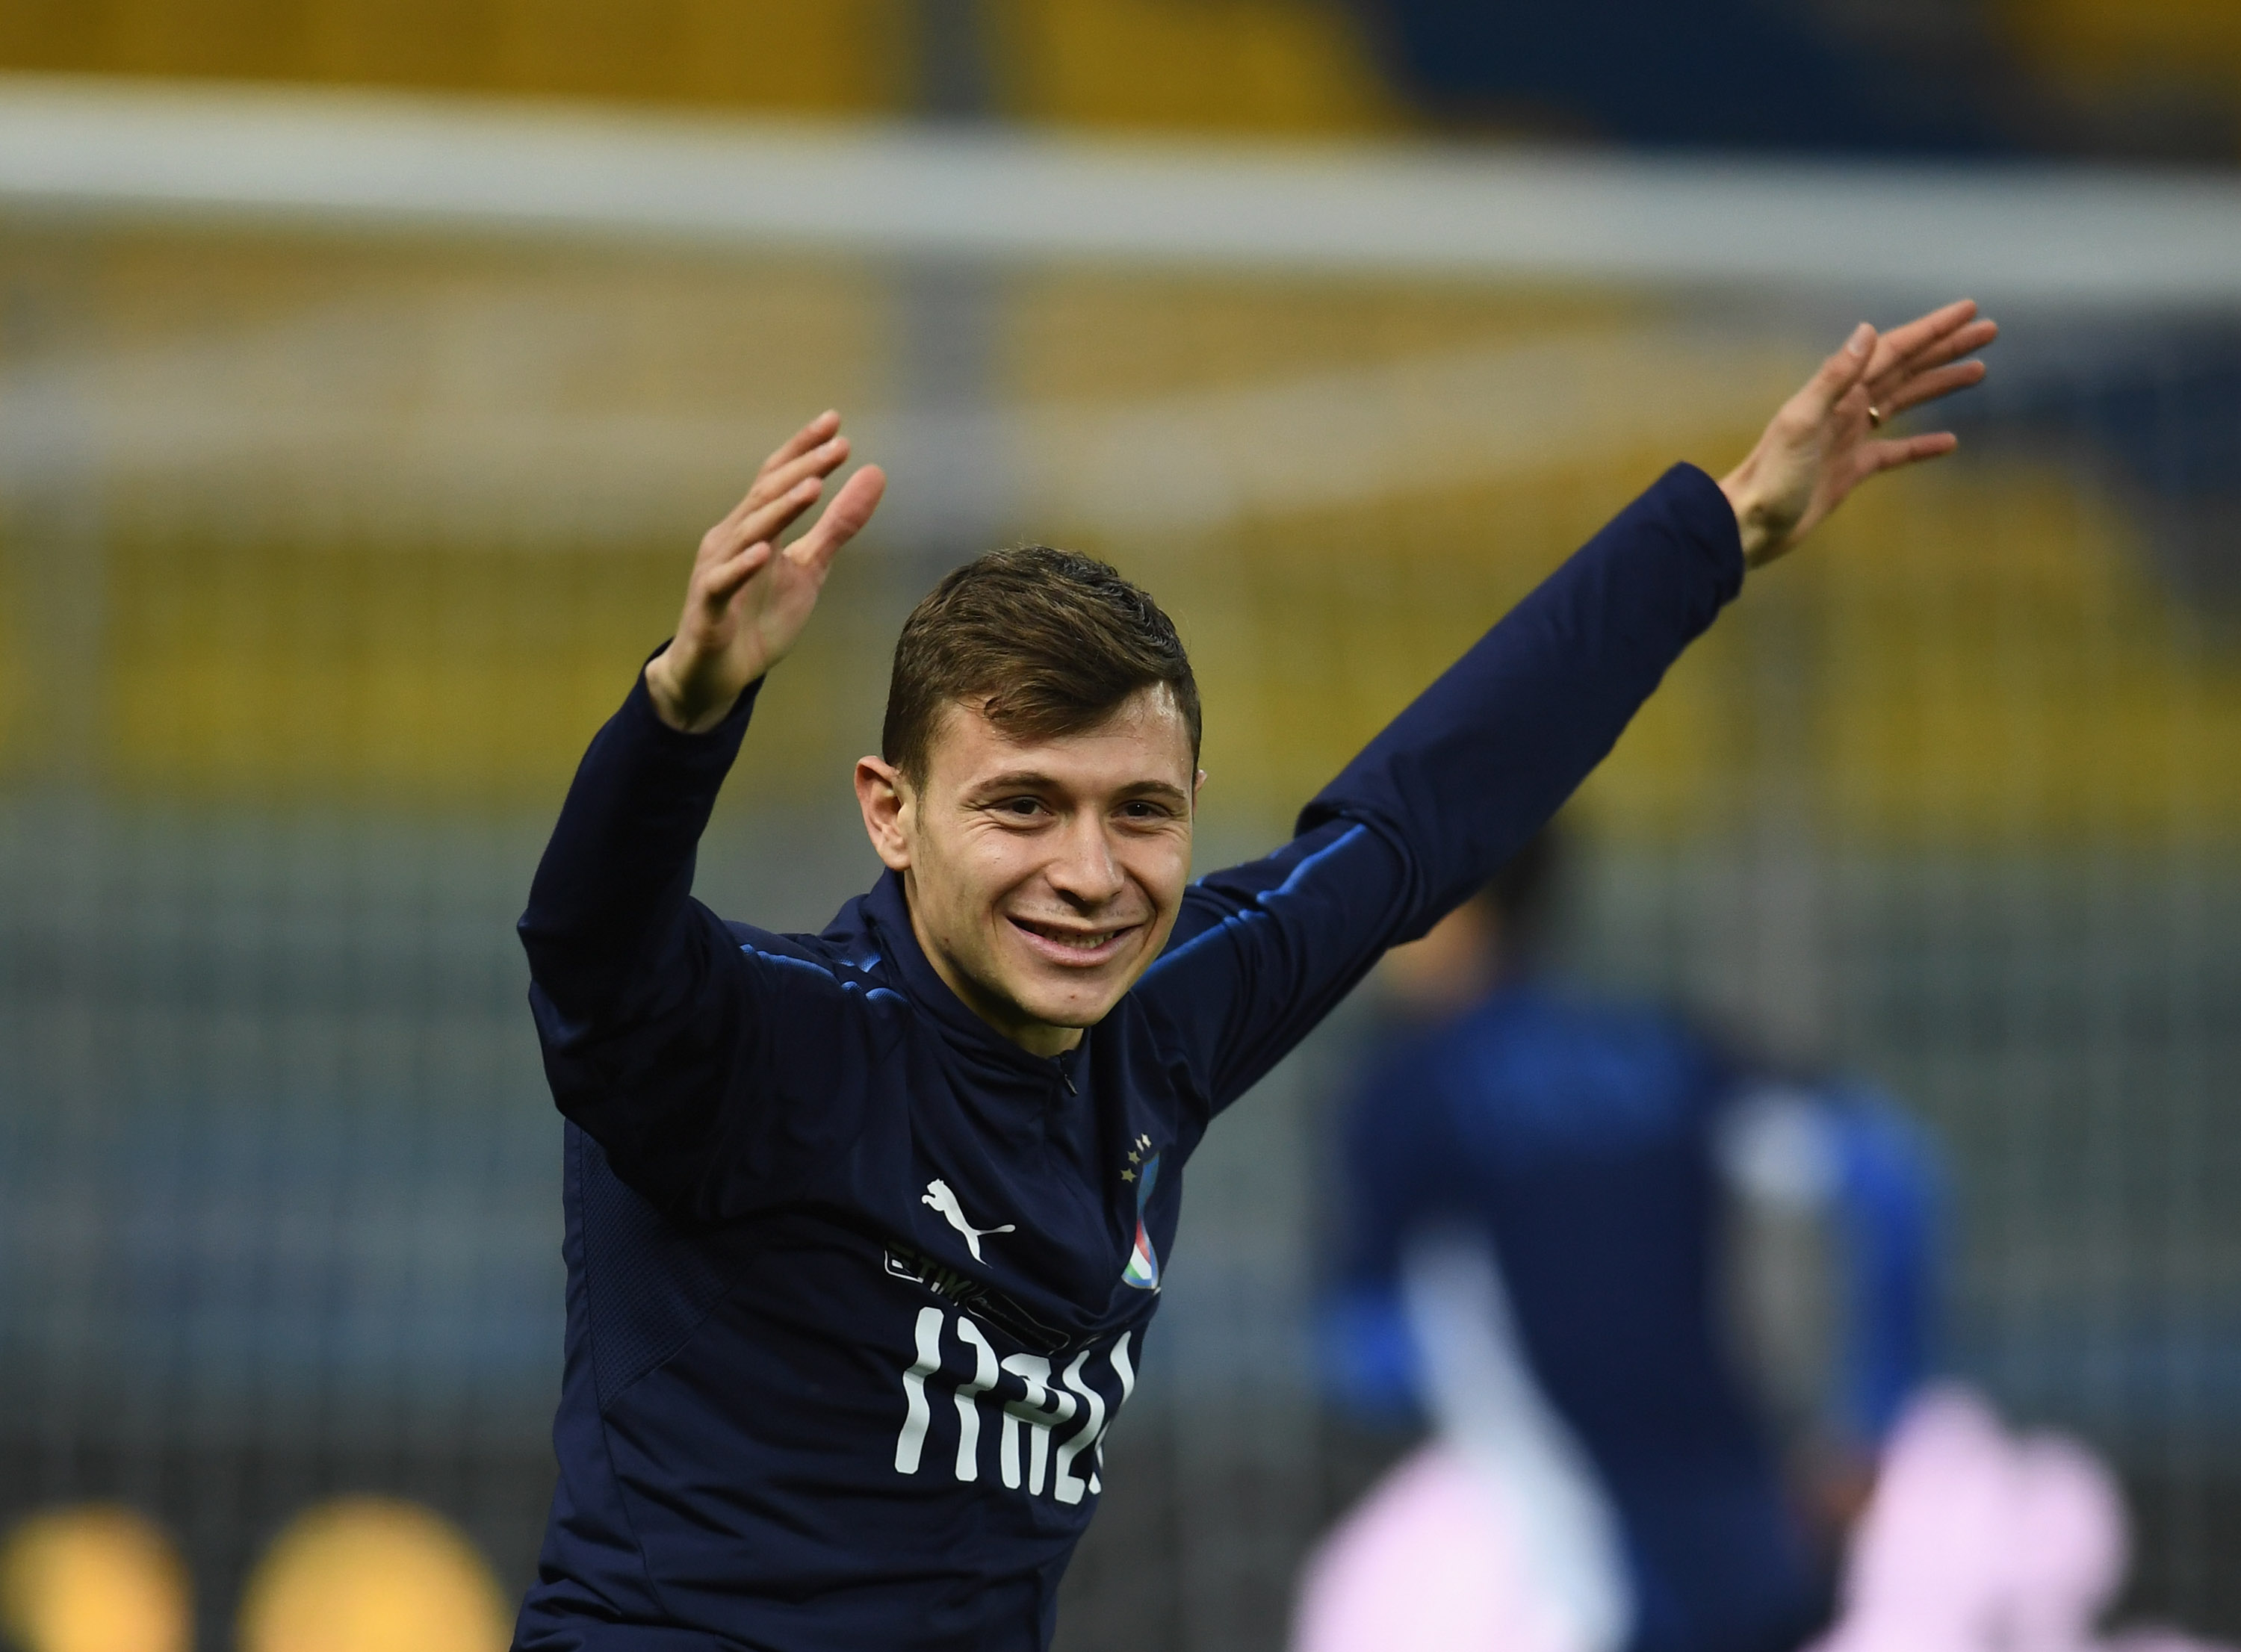 Nicolo Barella is a target for Premier League clubs. (Photo by Claudio Villa/Getty Images)